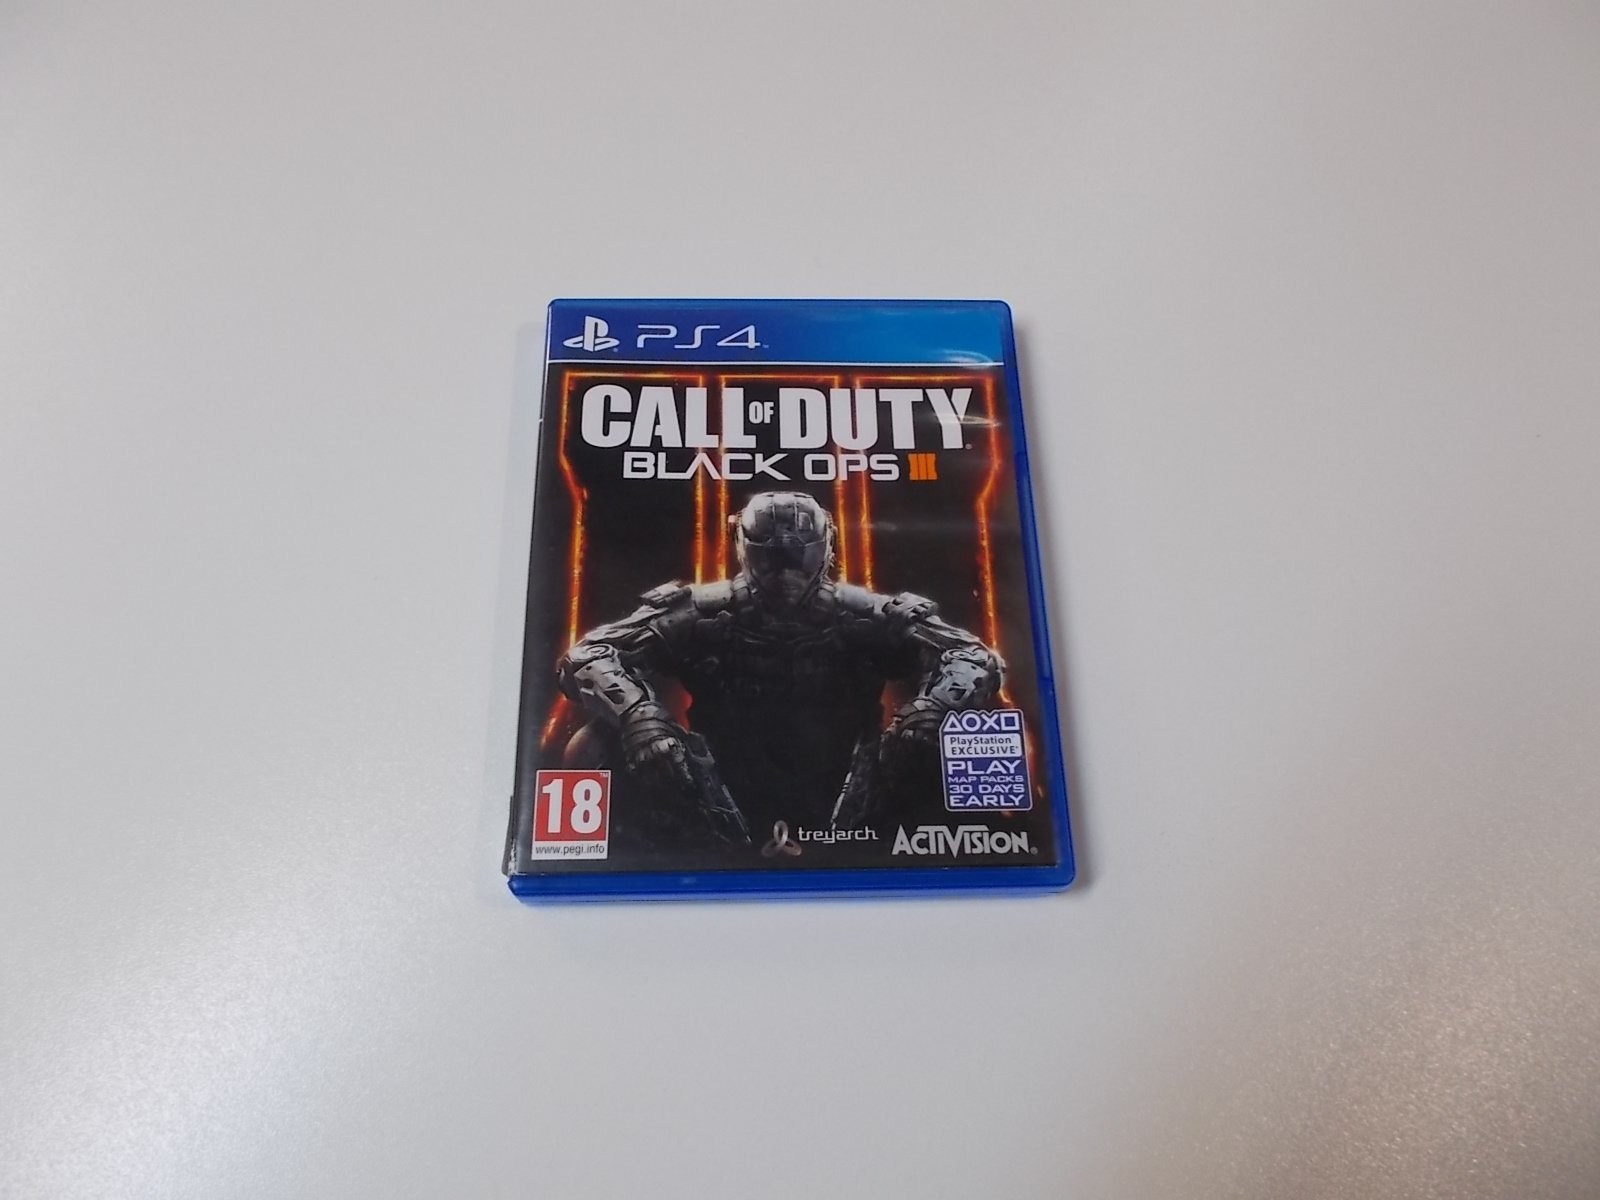 Call of duty Black Ops 3 - GRA Ps4 - Opole 0473